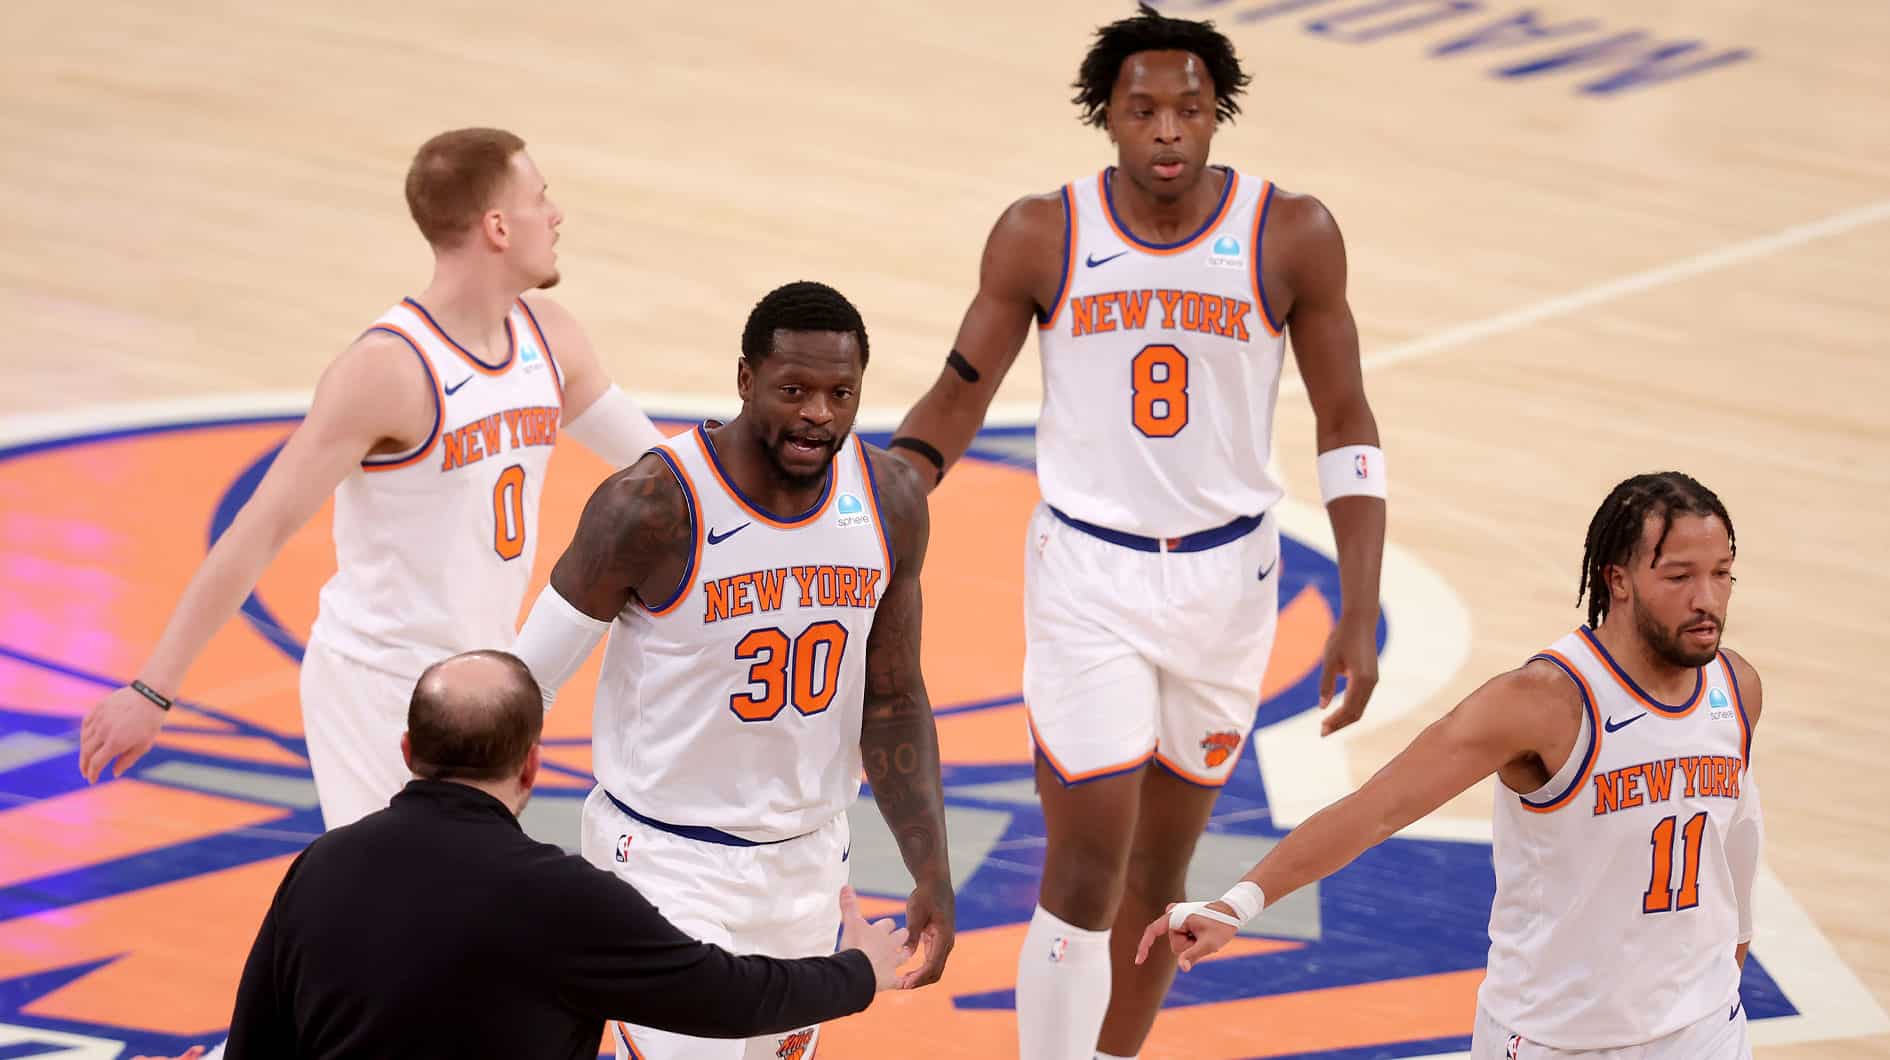 New York Knicks head coach Tom Thibodeau high fives New York Knicks forward Julius Randle (30) with guard Donte DiVincenzo (0) and forward OG Anunoby (8) and guard Jalen Brunson (11) during the first quarter against the Washington Wizards at Madison Square Garden